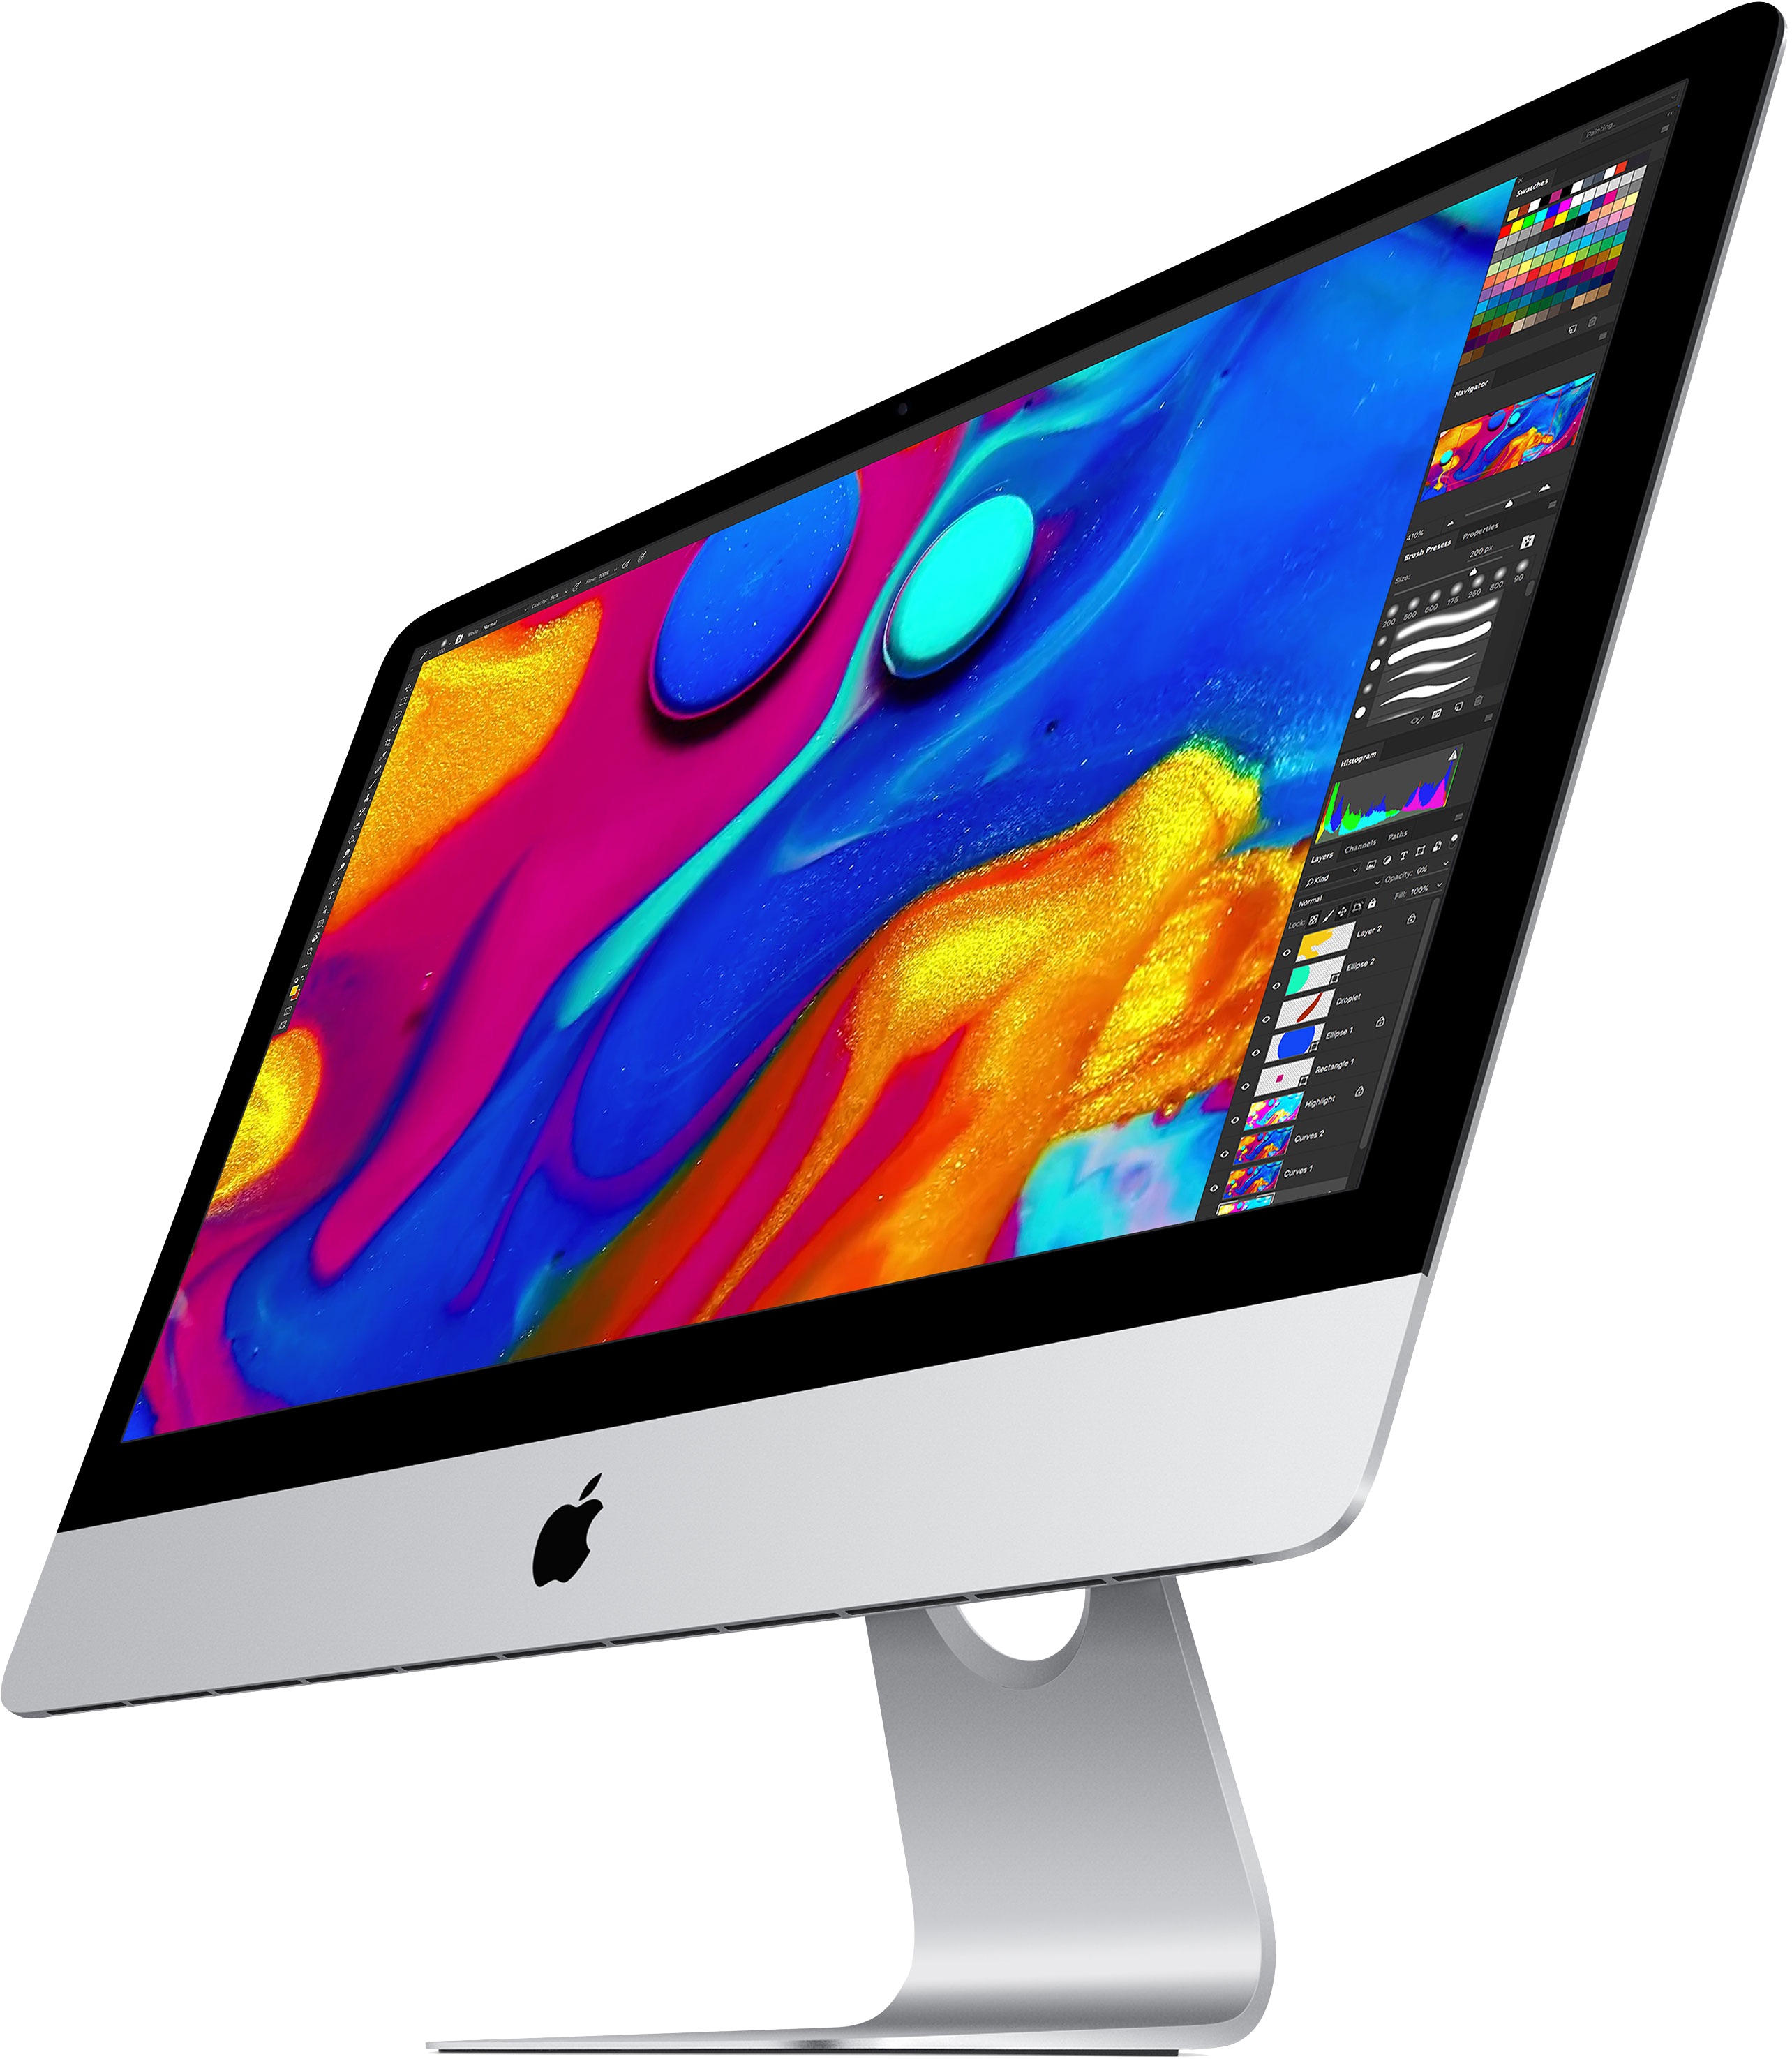 Imac Refresh Coming In 2020